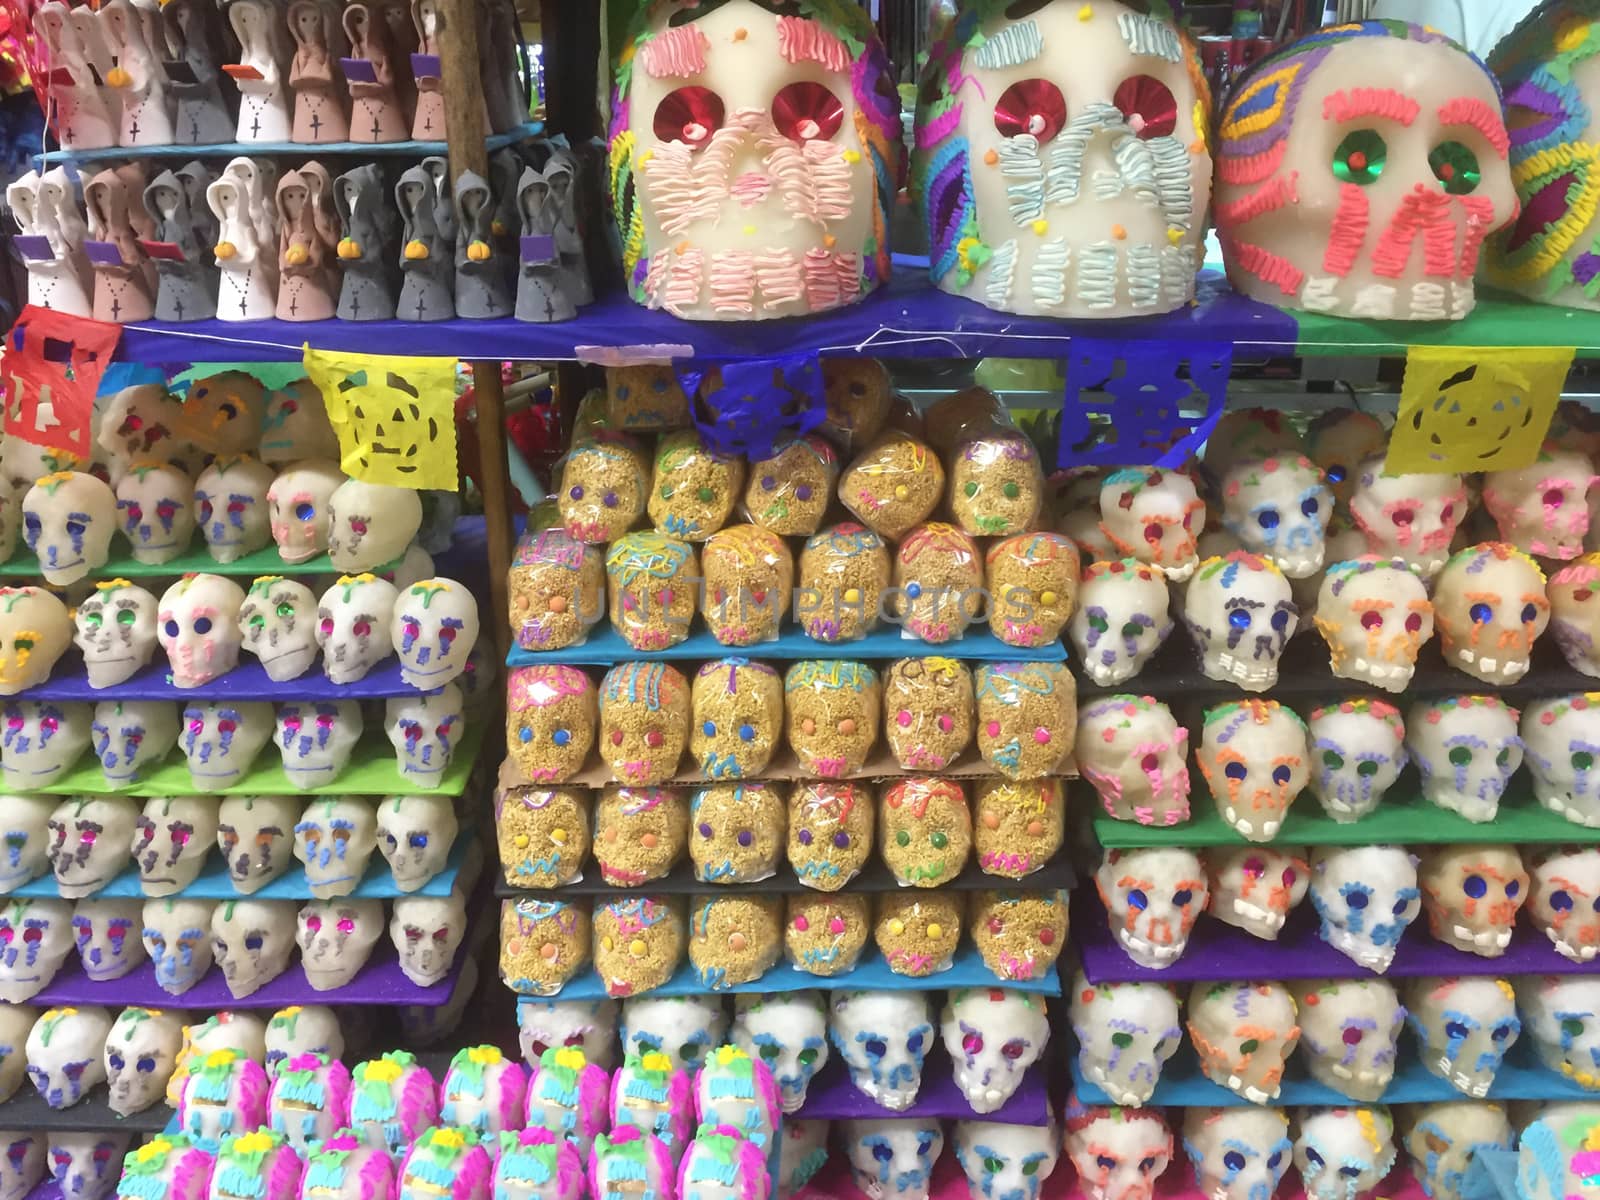 Mexican sugar skulls, traditional sweets used as offerings at altars for the Day of the Dead and only available around the time of that celebration